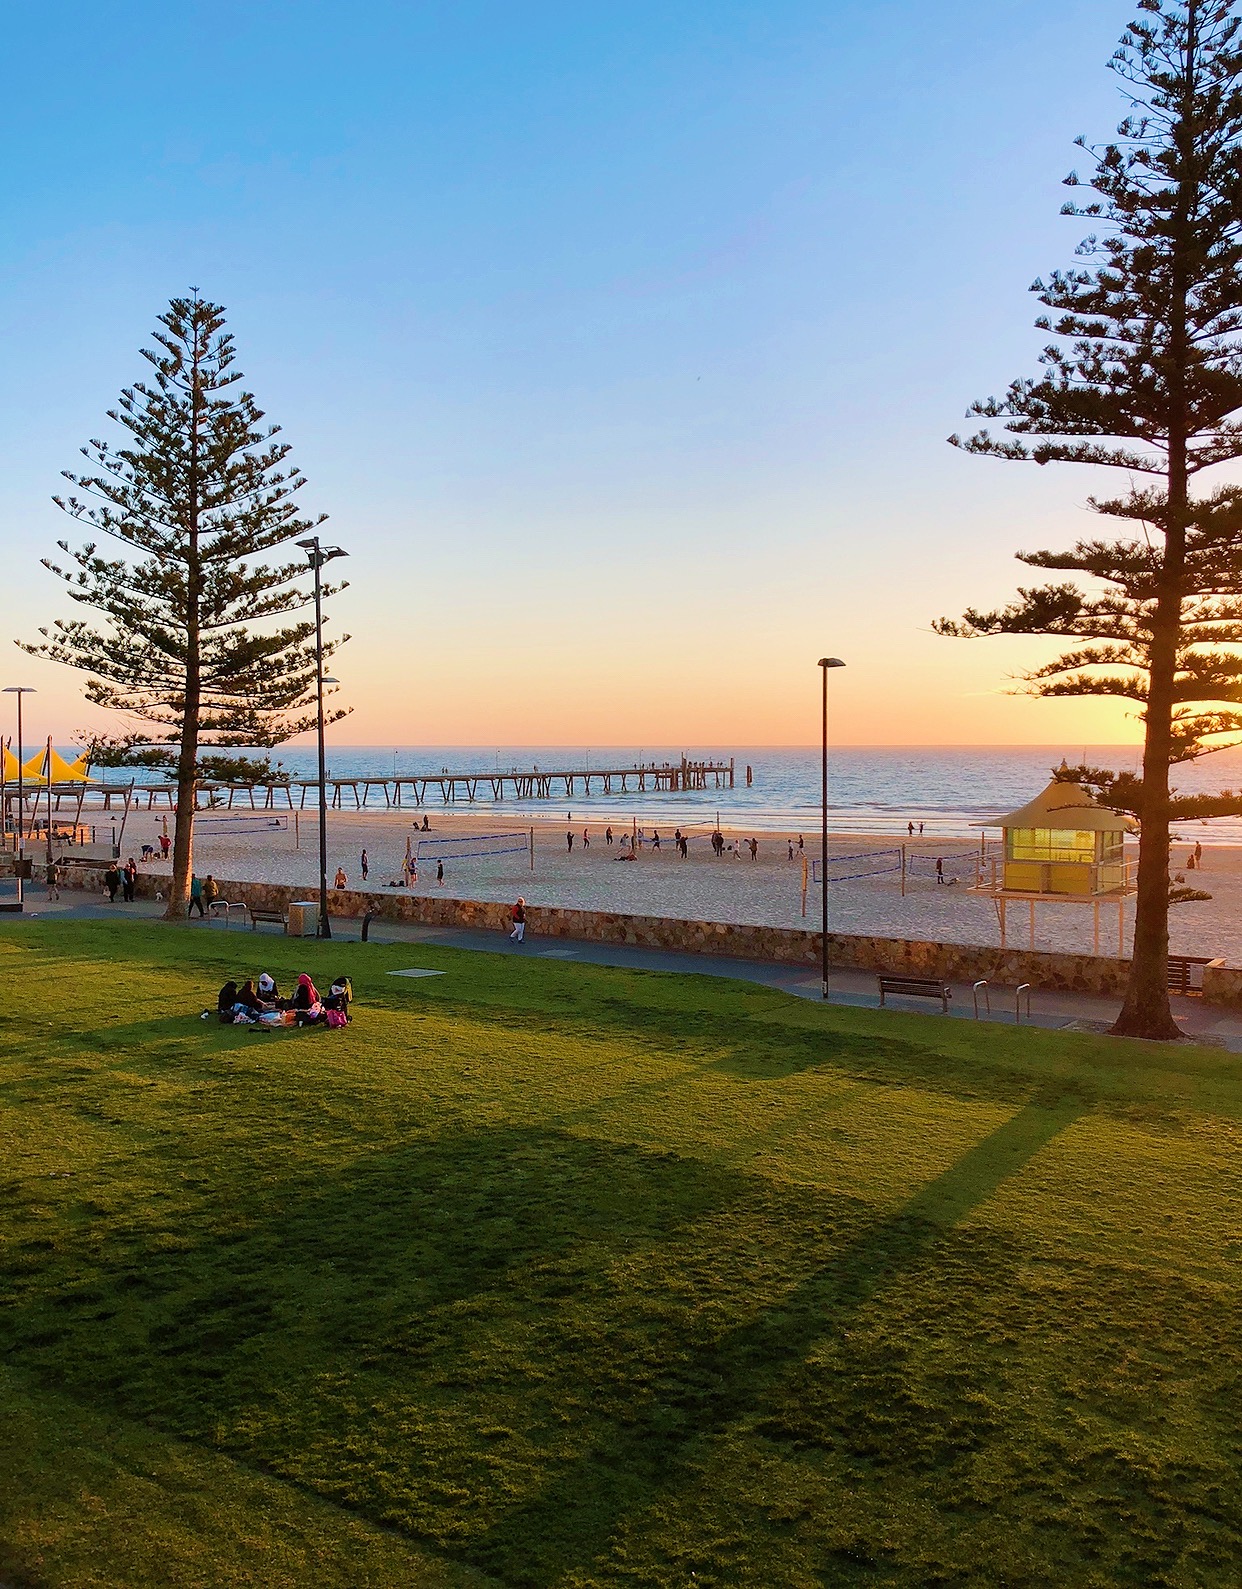 WIN the ultimate staycation in Glenelg thanks to Bernie Lewis Home Loans!